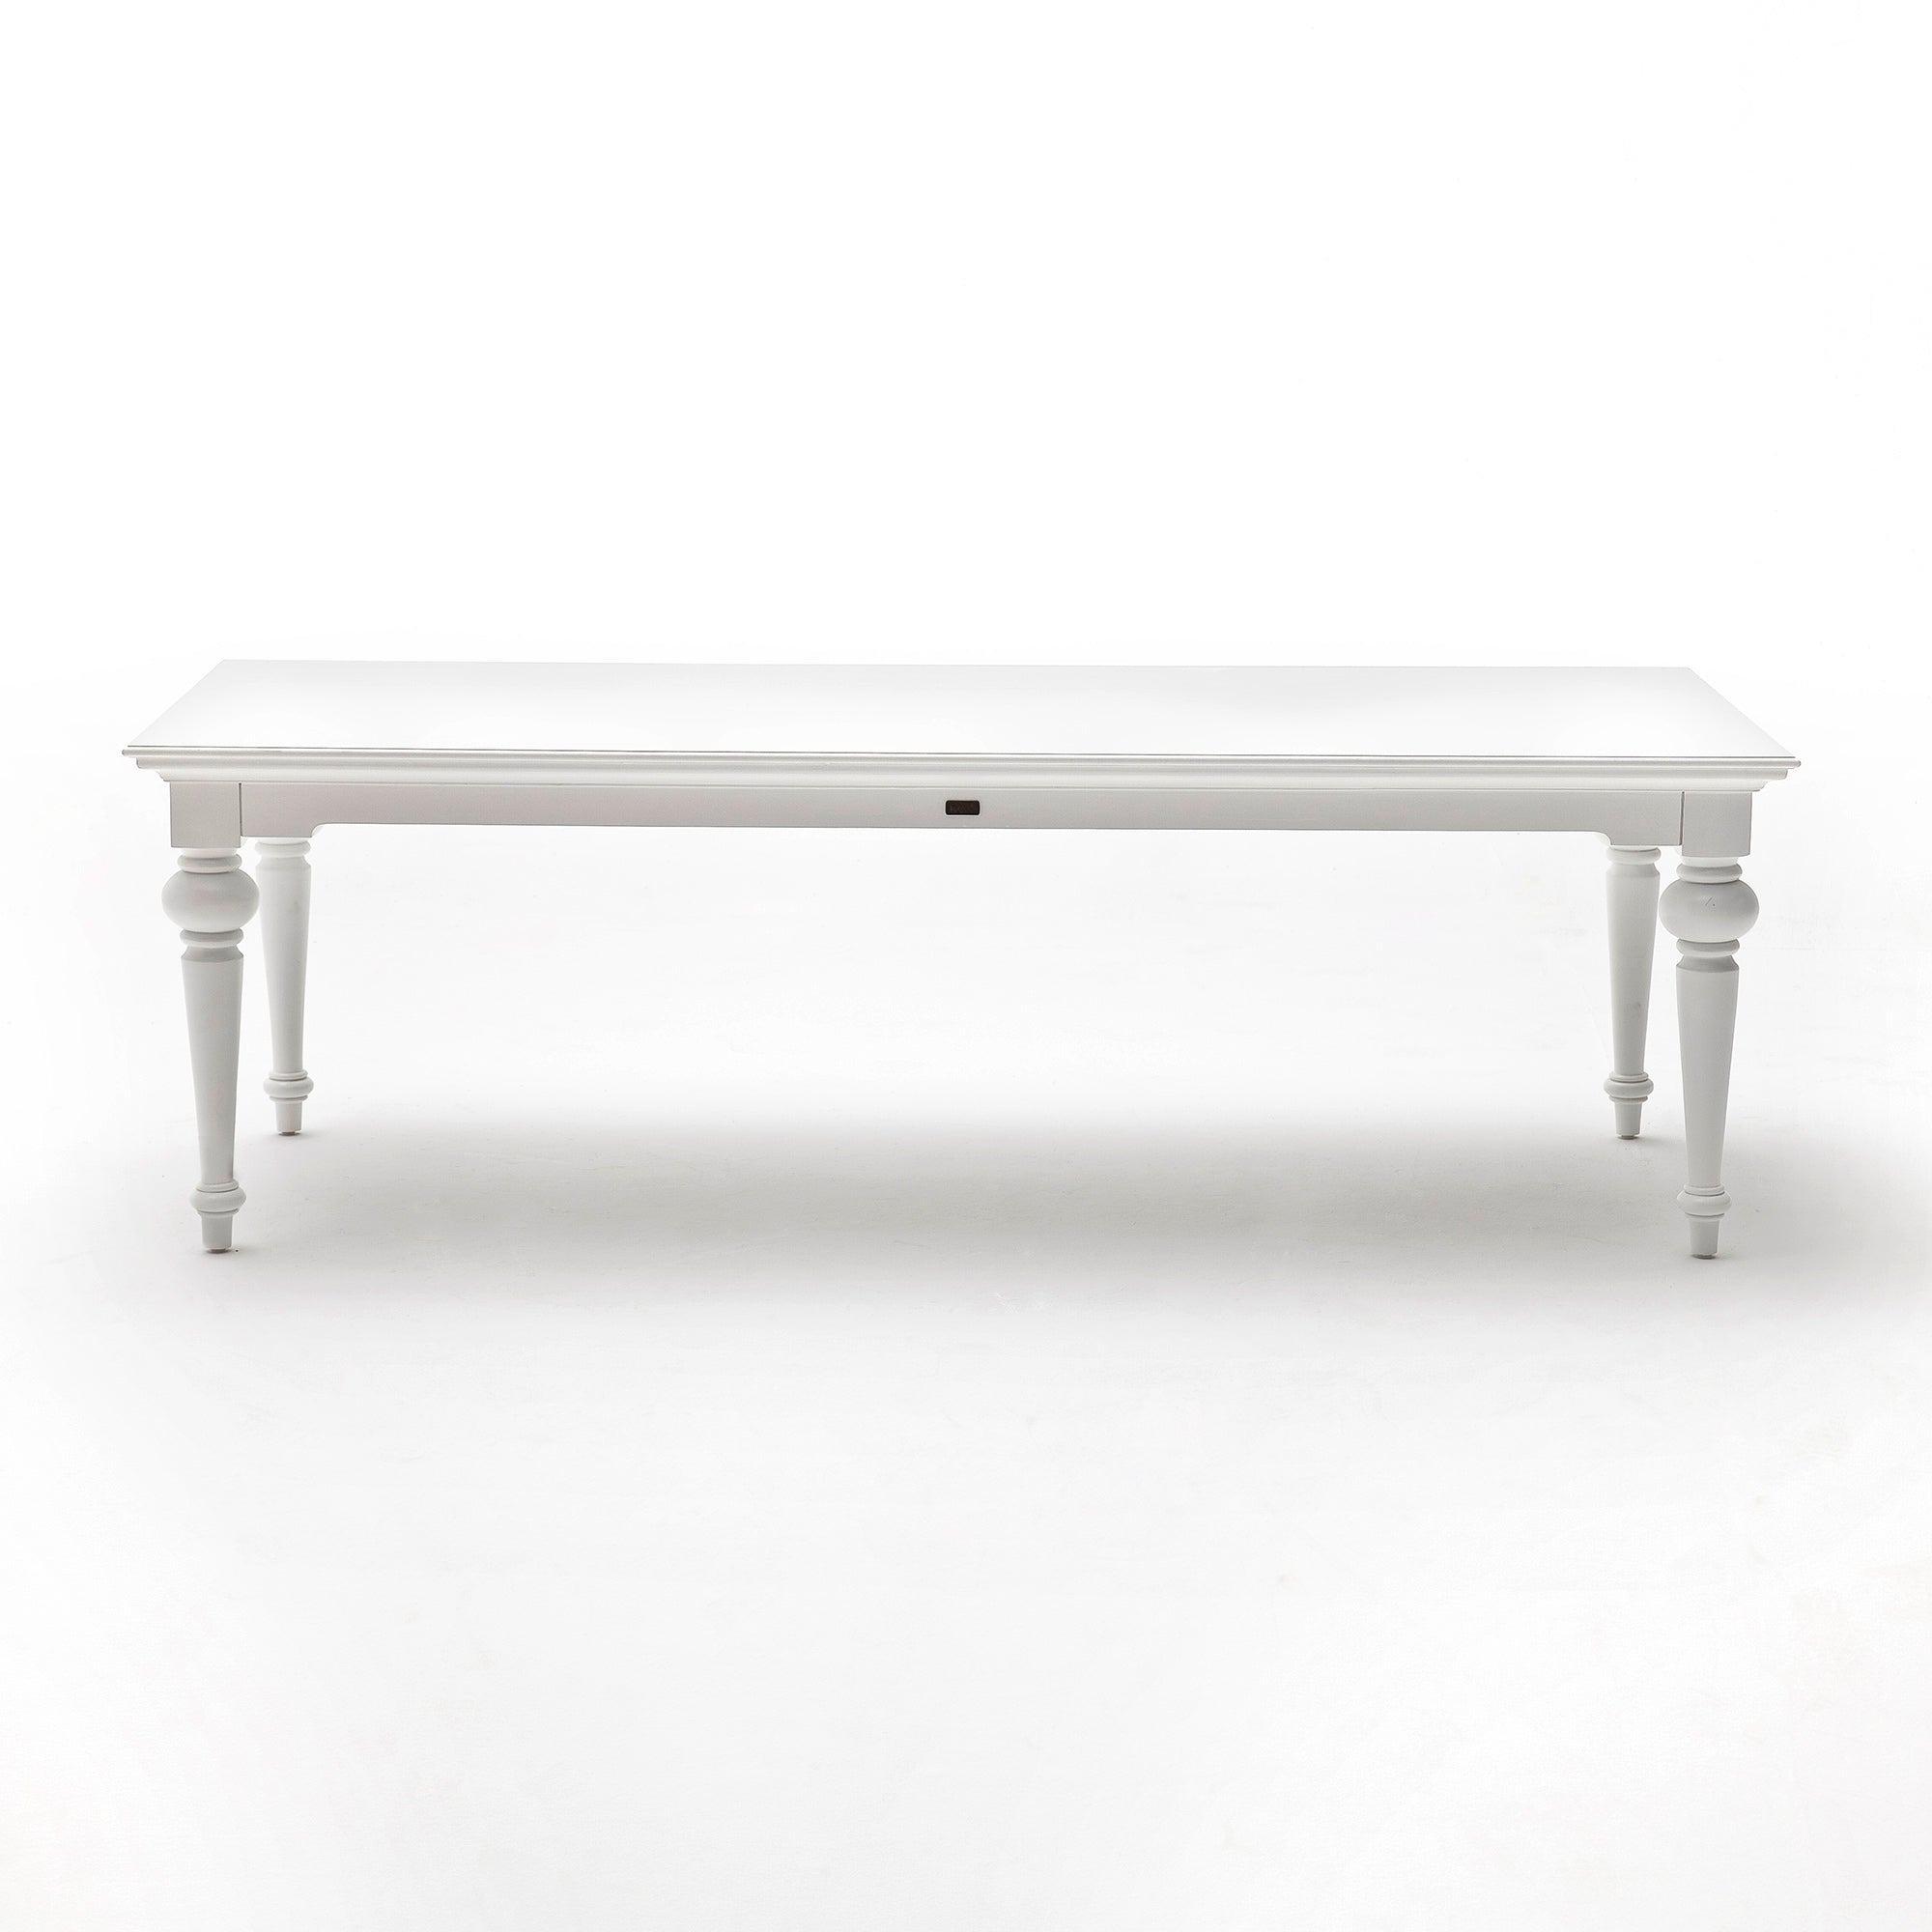 Provence dining table 240 cm